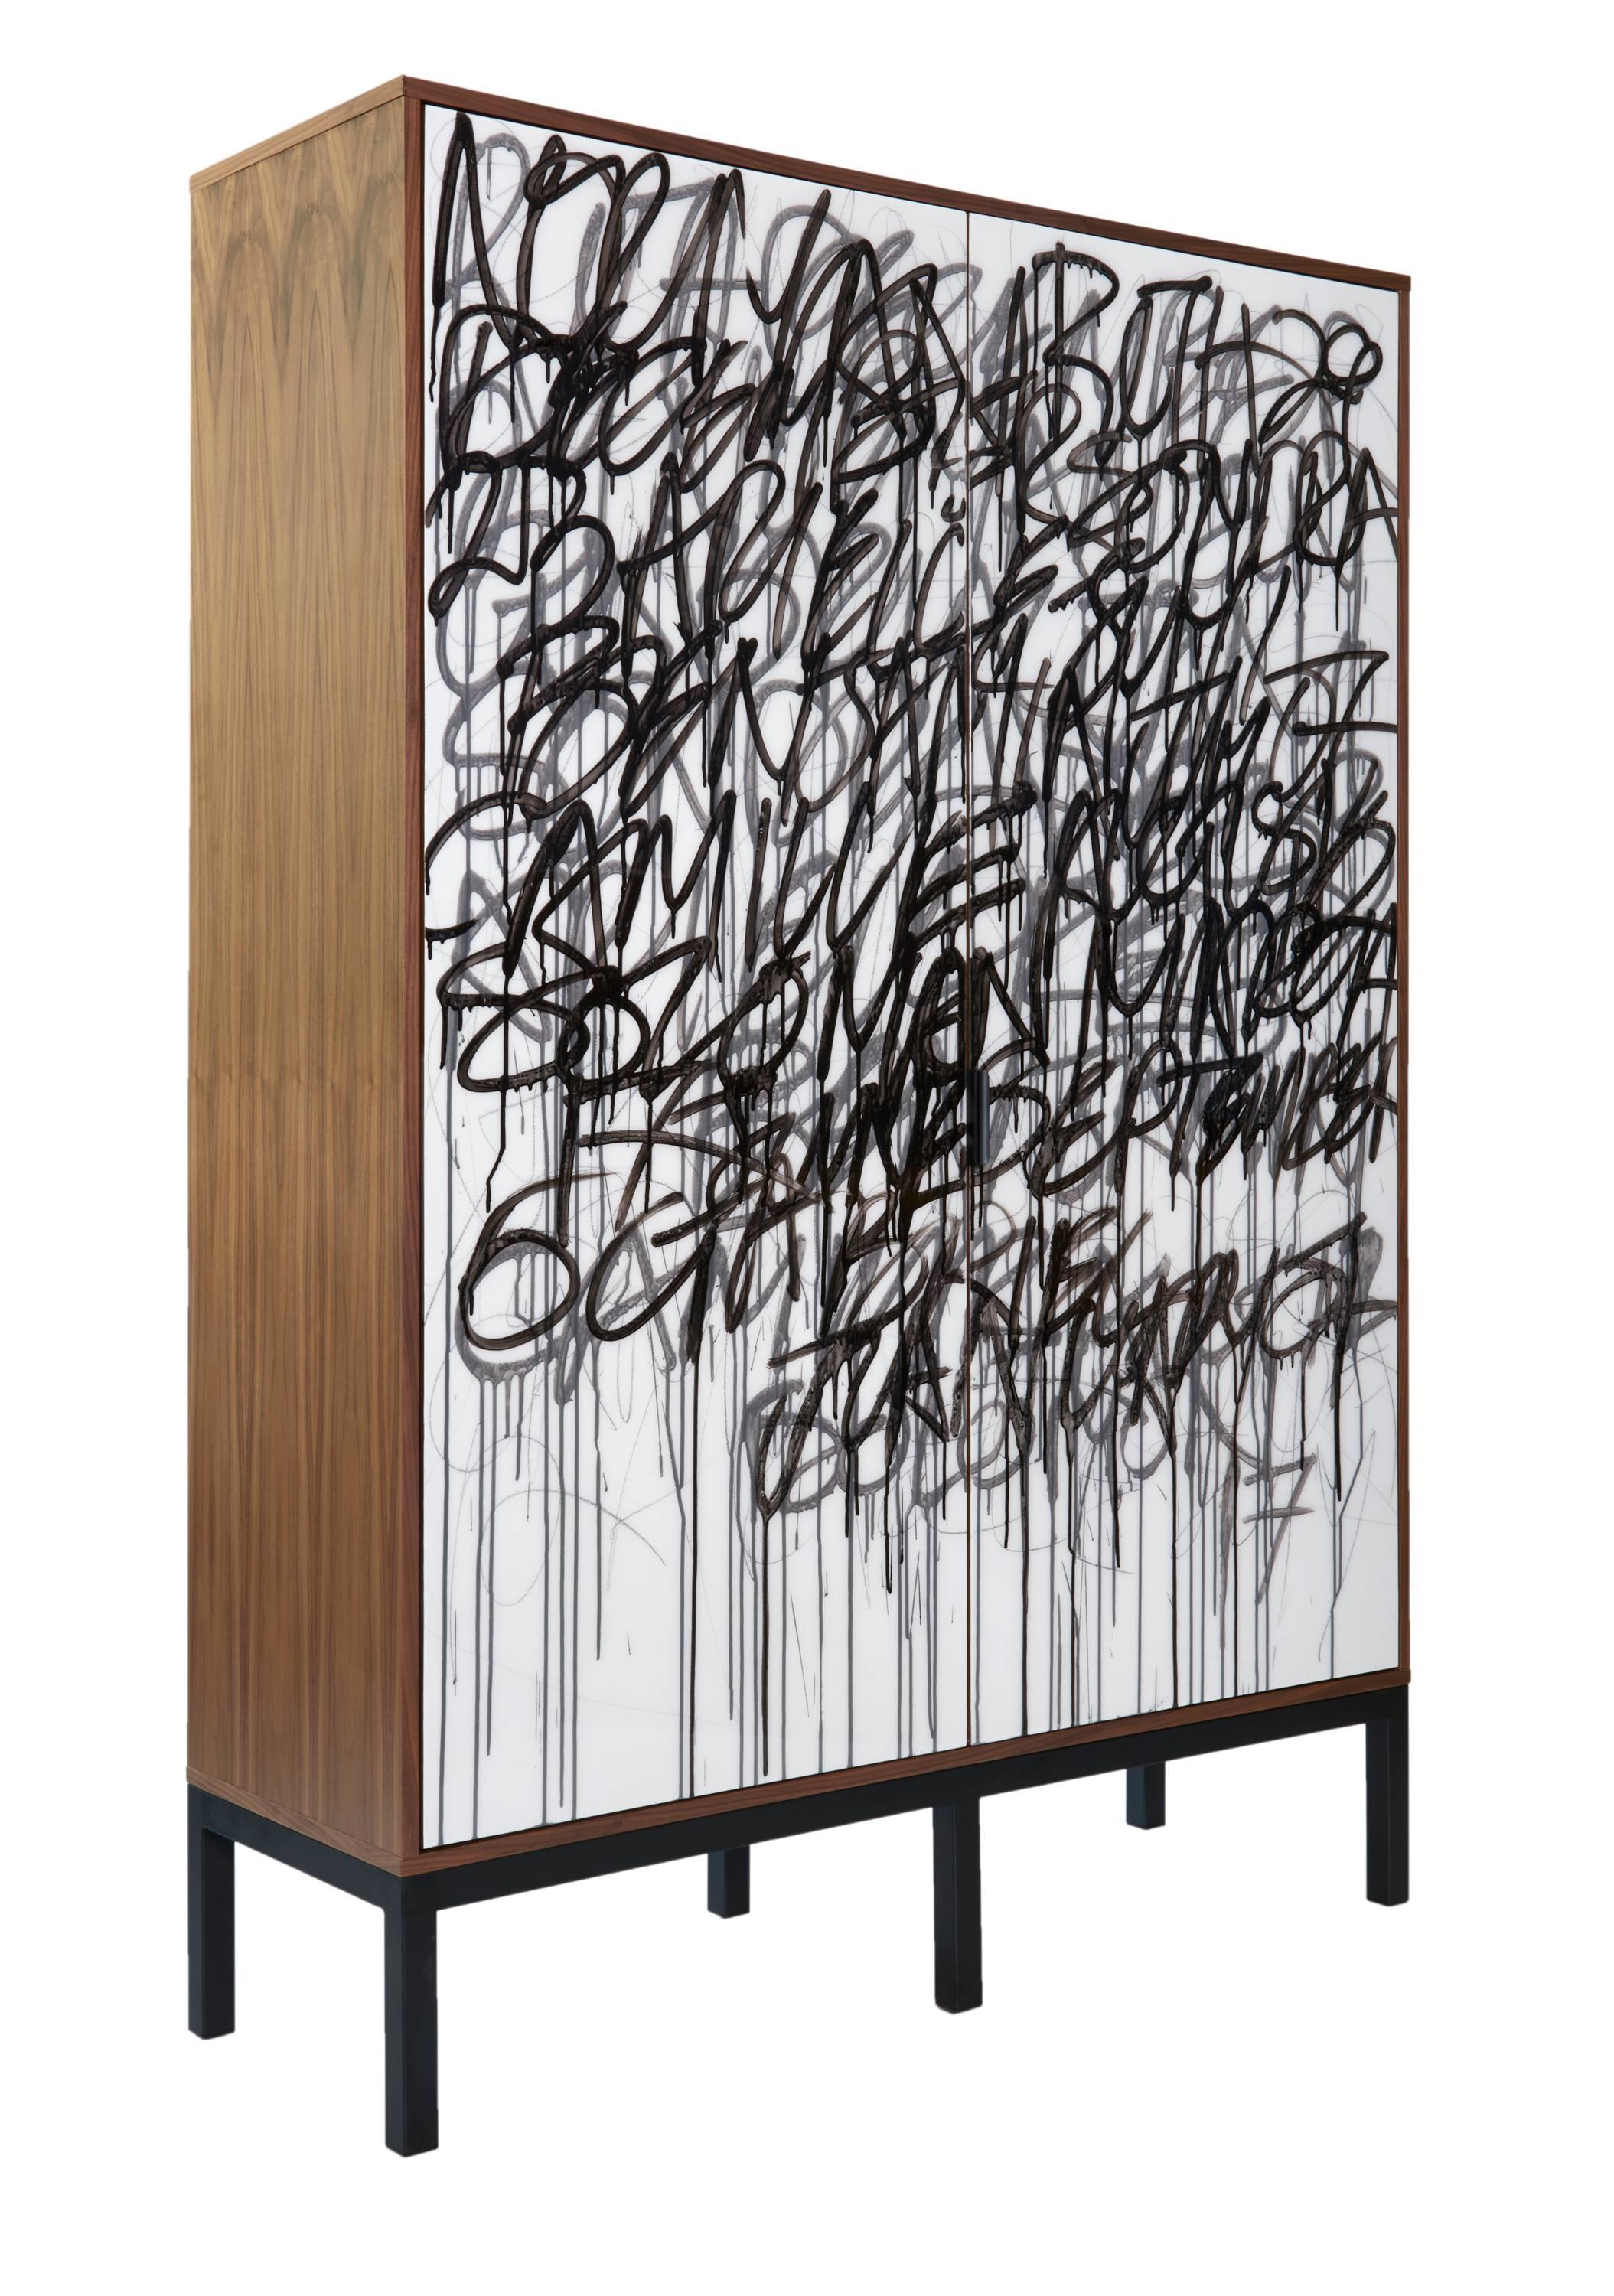 
Our 'Say it Again' cabinet is designed and finished in our Toronto Studio, Morgan Clayhall. 

The client can supply words/poems/names/birthdays, etc that can be incorporated into the artwork on the doors by the artist. 
The art on the doors is mix